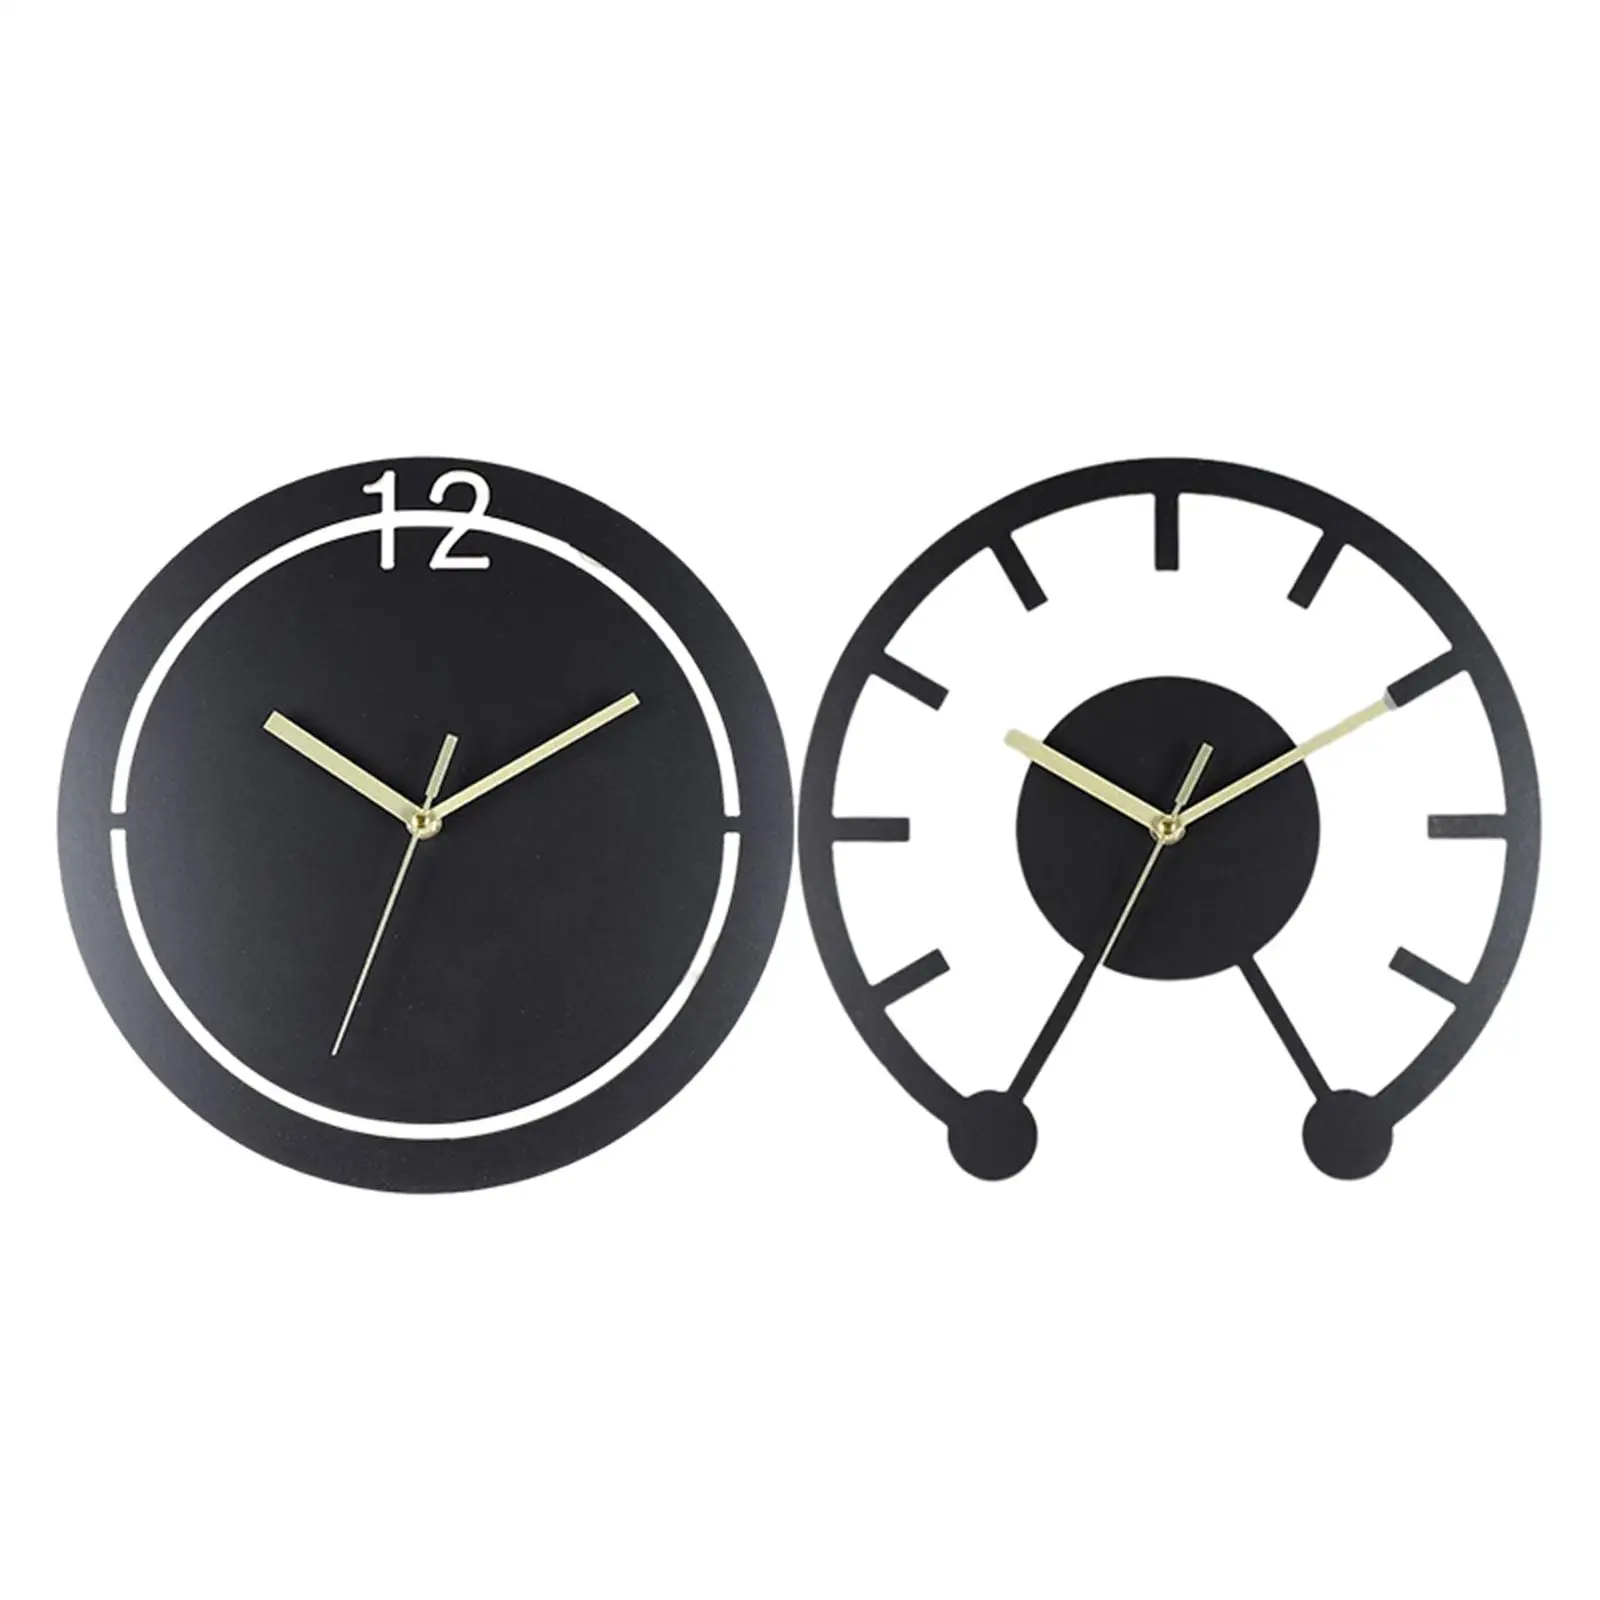 Wall Clock DIY Non Ticking Battery Operated Hanging Watches Round for Dining Room Household Kitchen Office Decoration